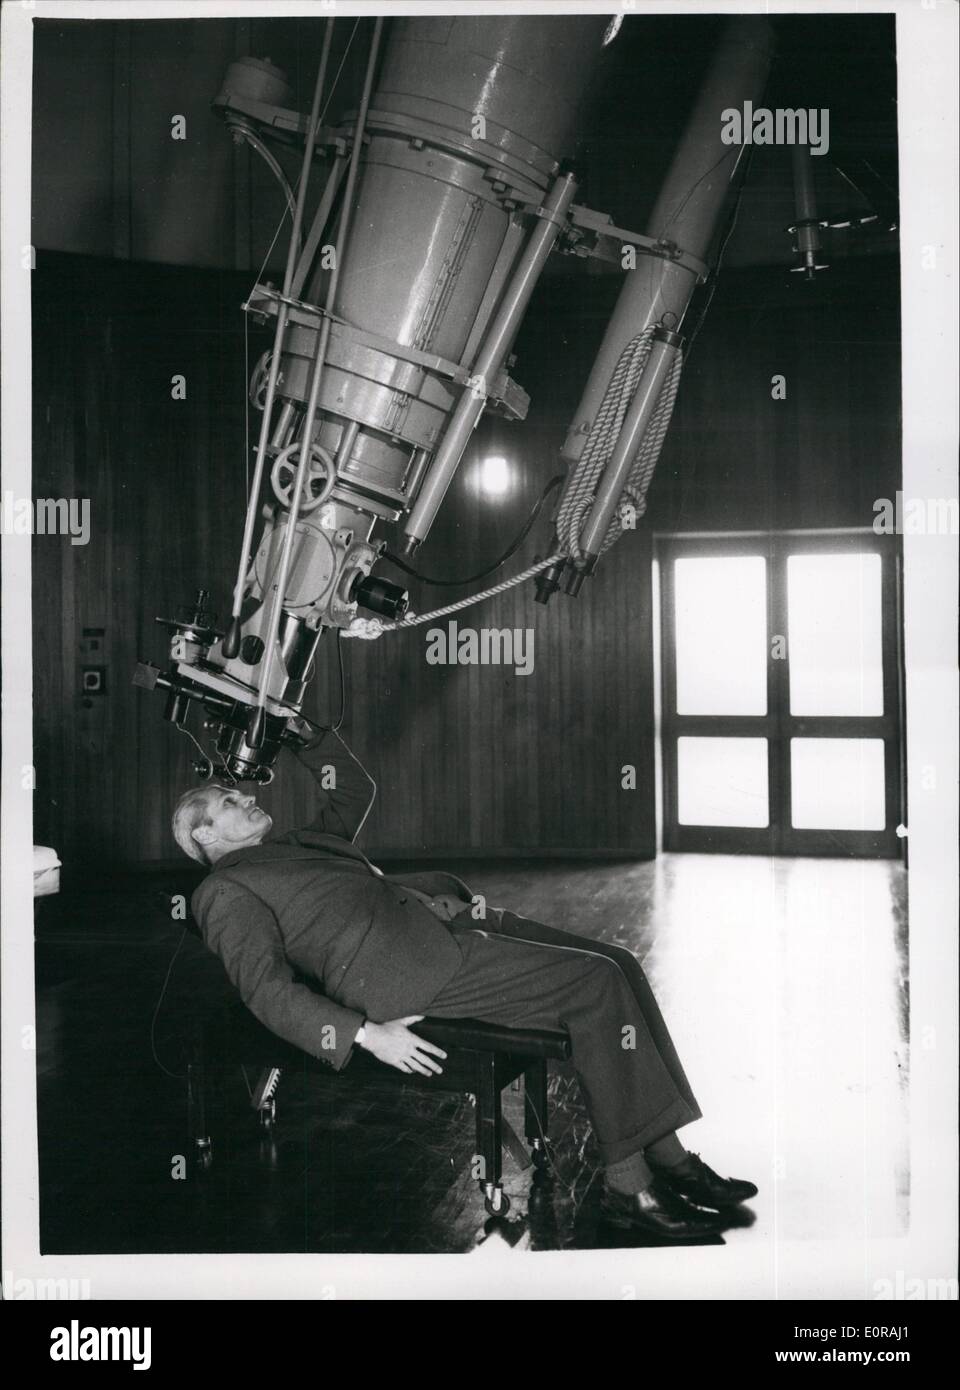 Nov. 11, 1958 - The New Royal Greenwich Observatory - Herstmonceux Castle - Sussex. Giant telescope which were mounted at Greenwich have been re-erected at ''Dome Town'' Herstmonceux Castle, Sussex.. The move has been going on for years - and is now complete.. The famous castle is used for administrative offices - labs - and library.. The telescope are housed in the specially constructed domes built in the castle grounds. Keystone Photo Shows:- Dr Stock Photo